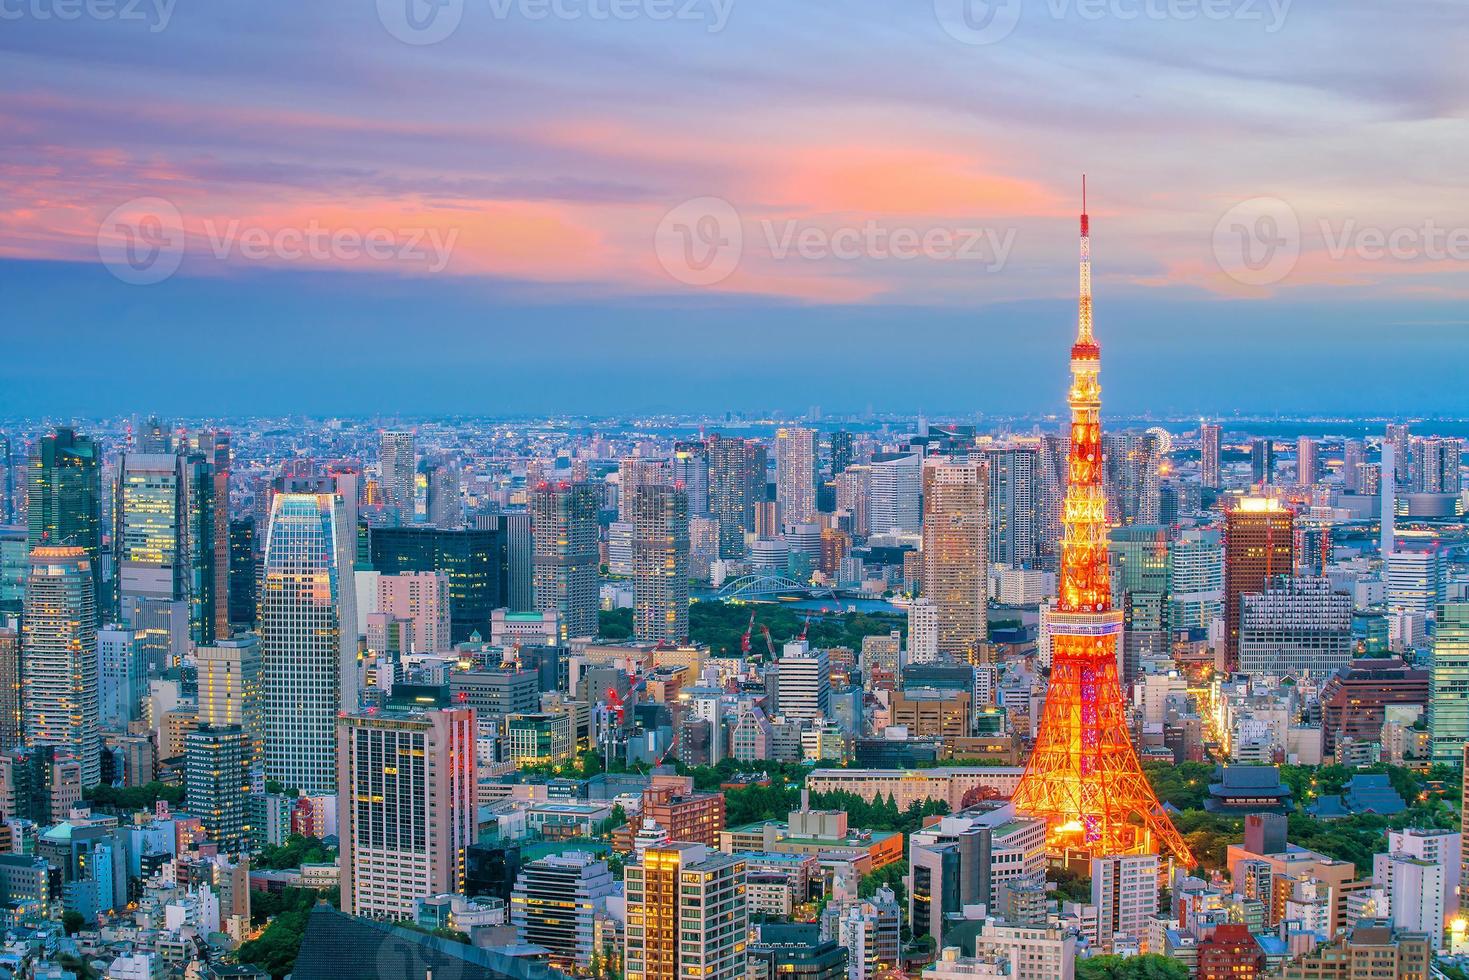 Panorama view of Tokyo city skyline  with Tokyo Tower and business center at twilight photo